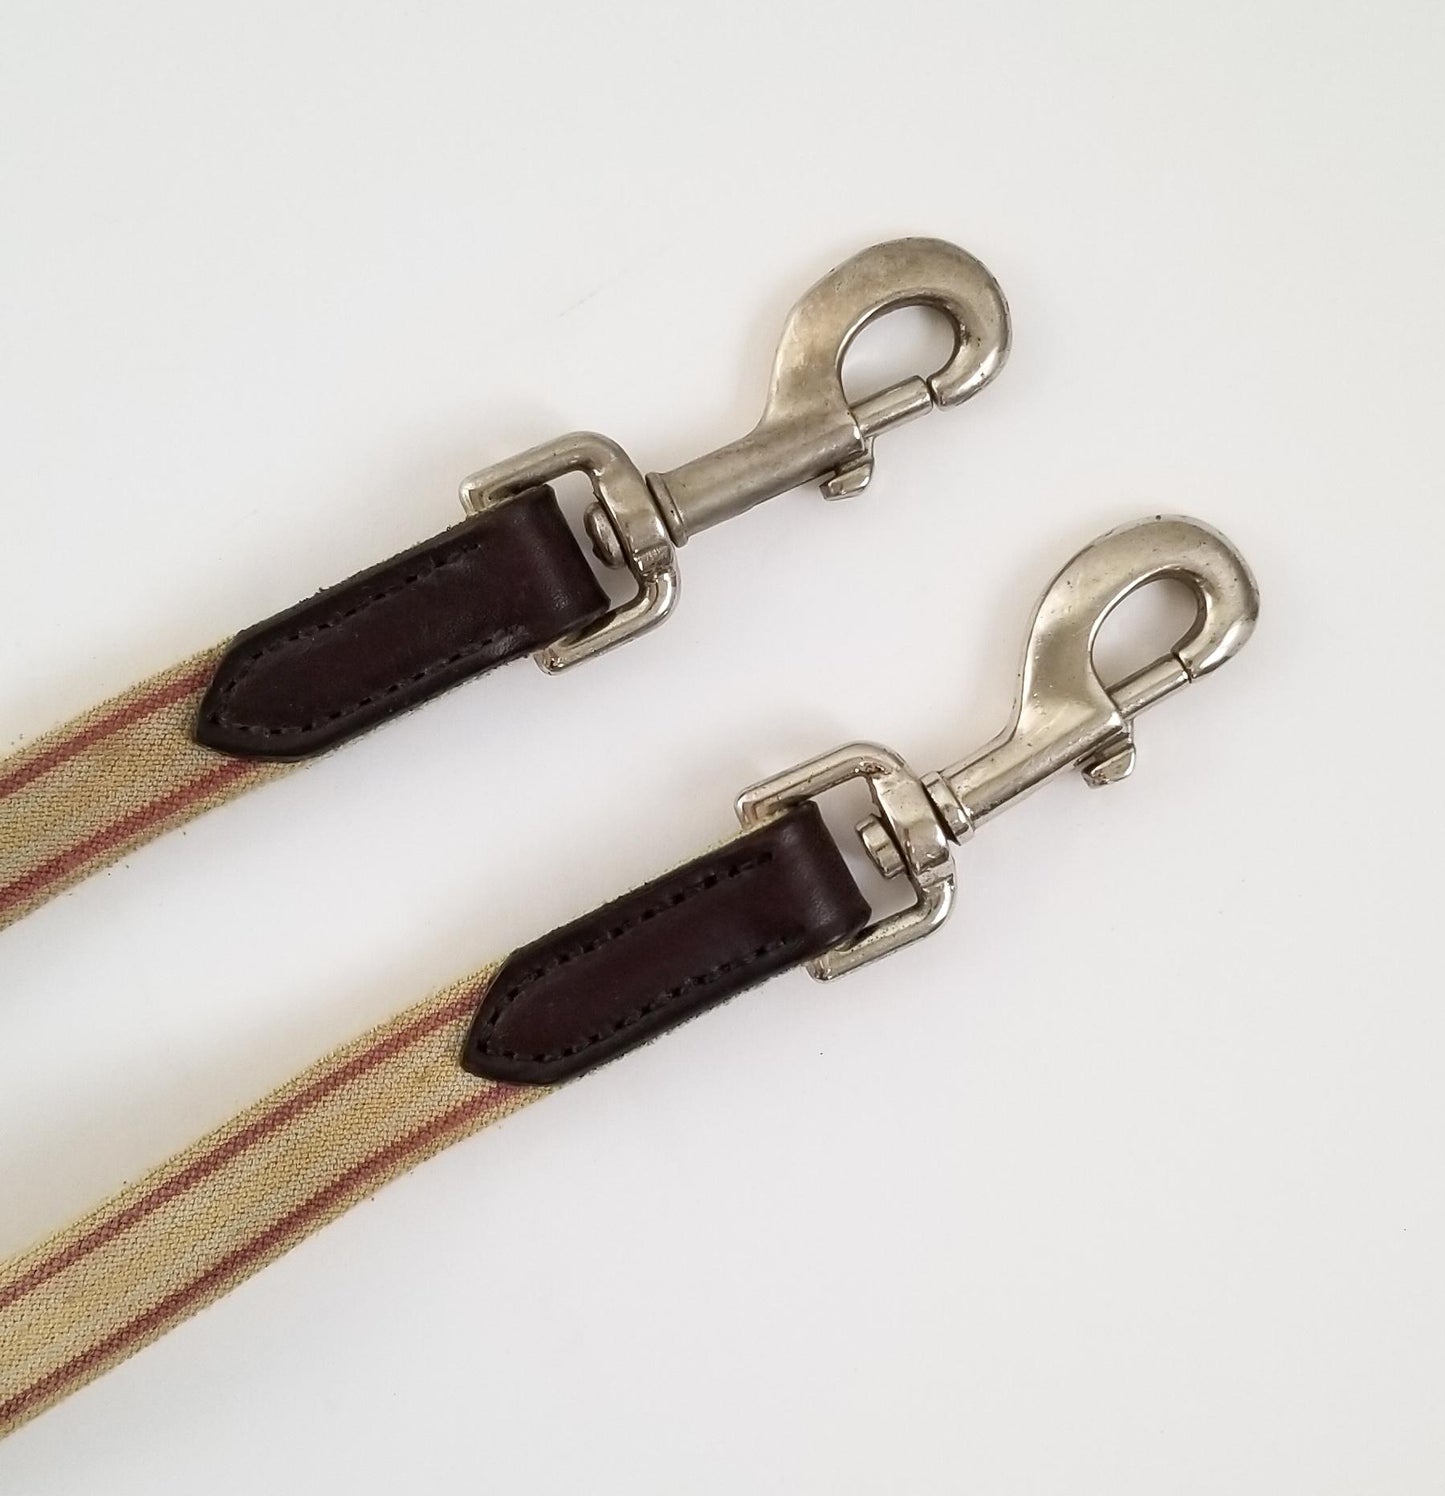 Tory Leather and Elastic Side Reins - Brown - One Size  (Adjustable)